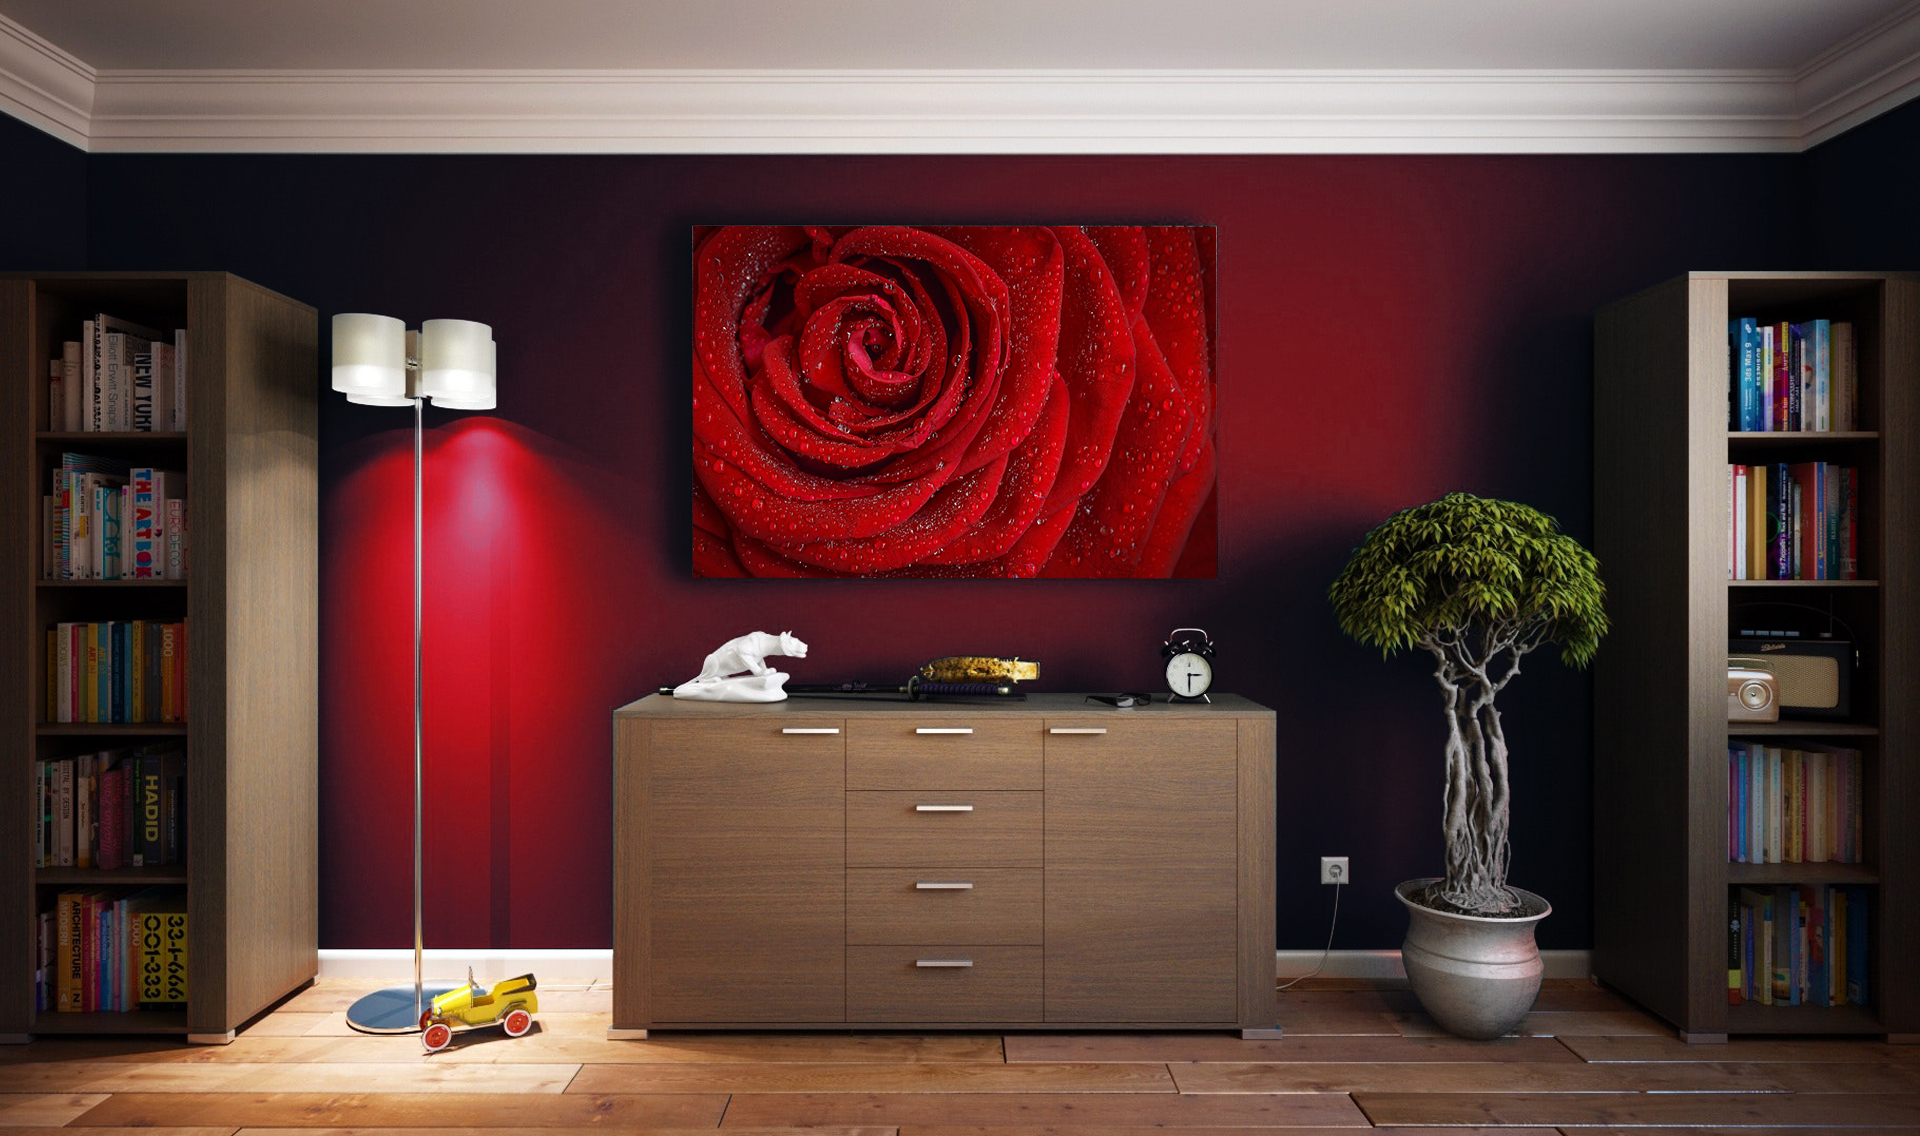 INT. LIVINGROOM BACK WALL RED – DAY